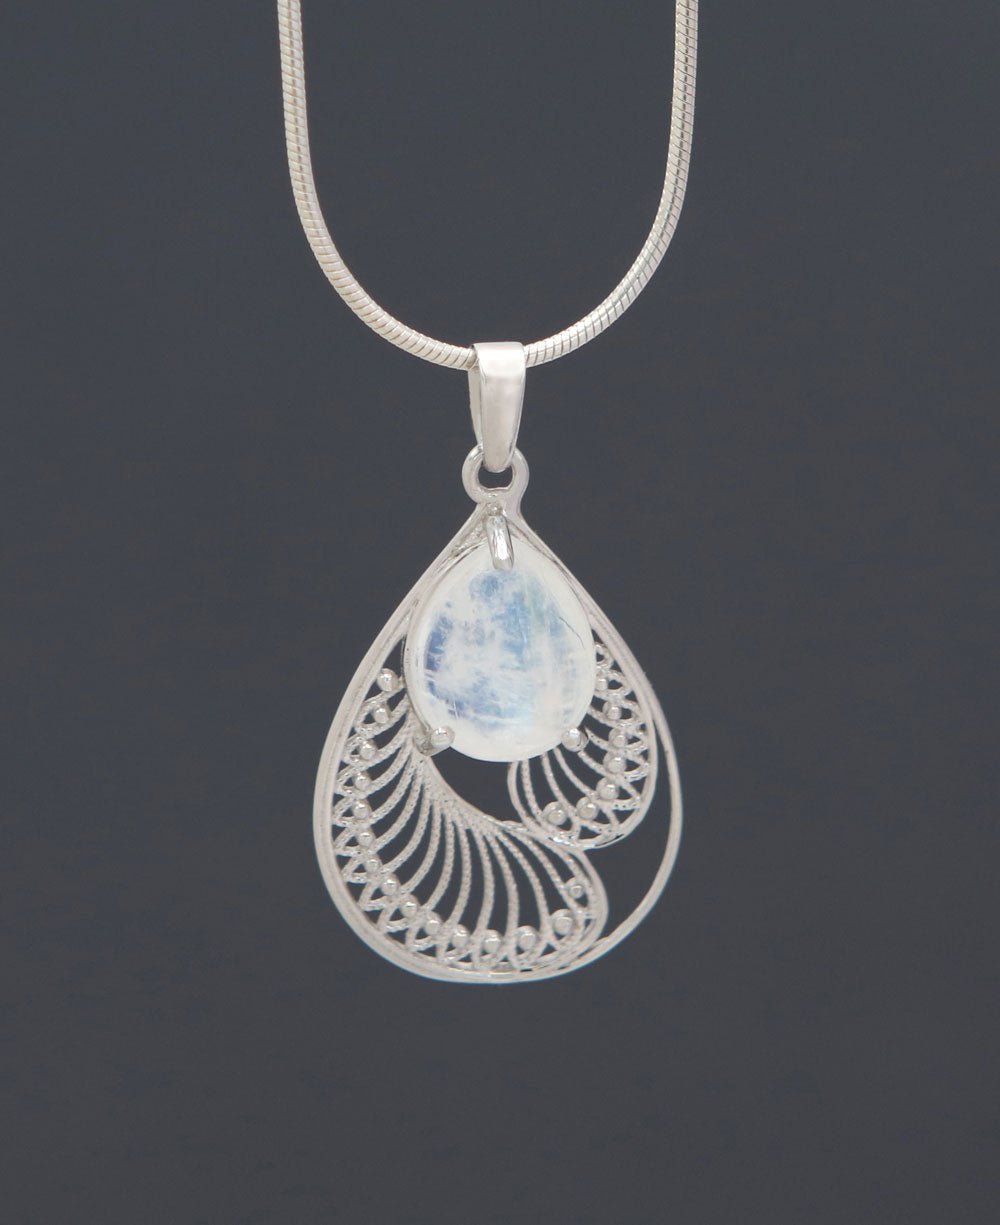 Rainbow Moonstone Pendant in Sterling Silver Feather Design - Charms & Pendants